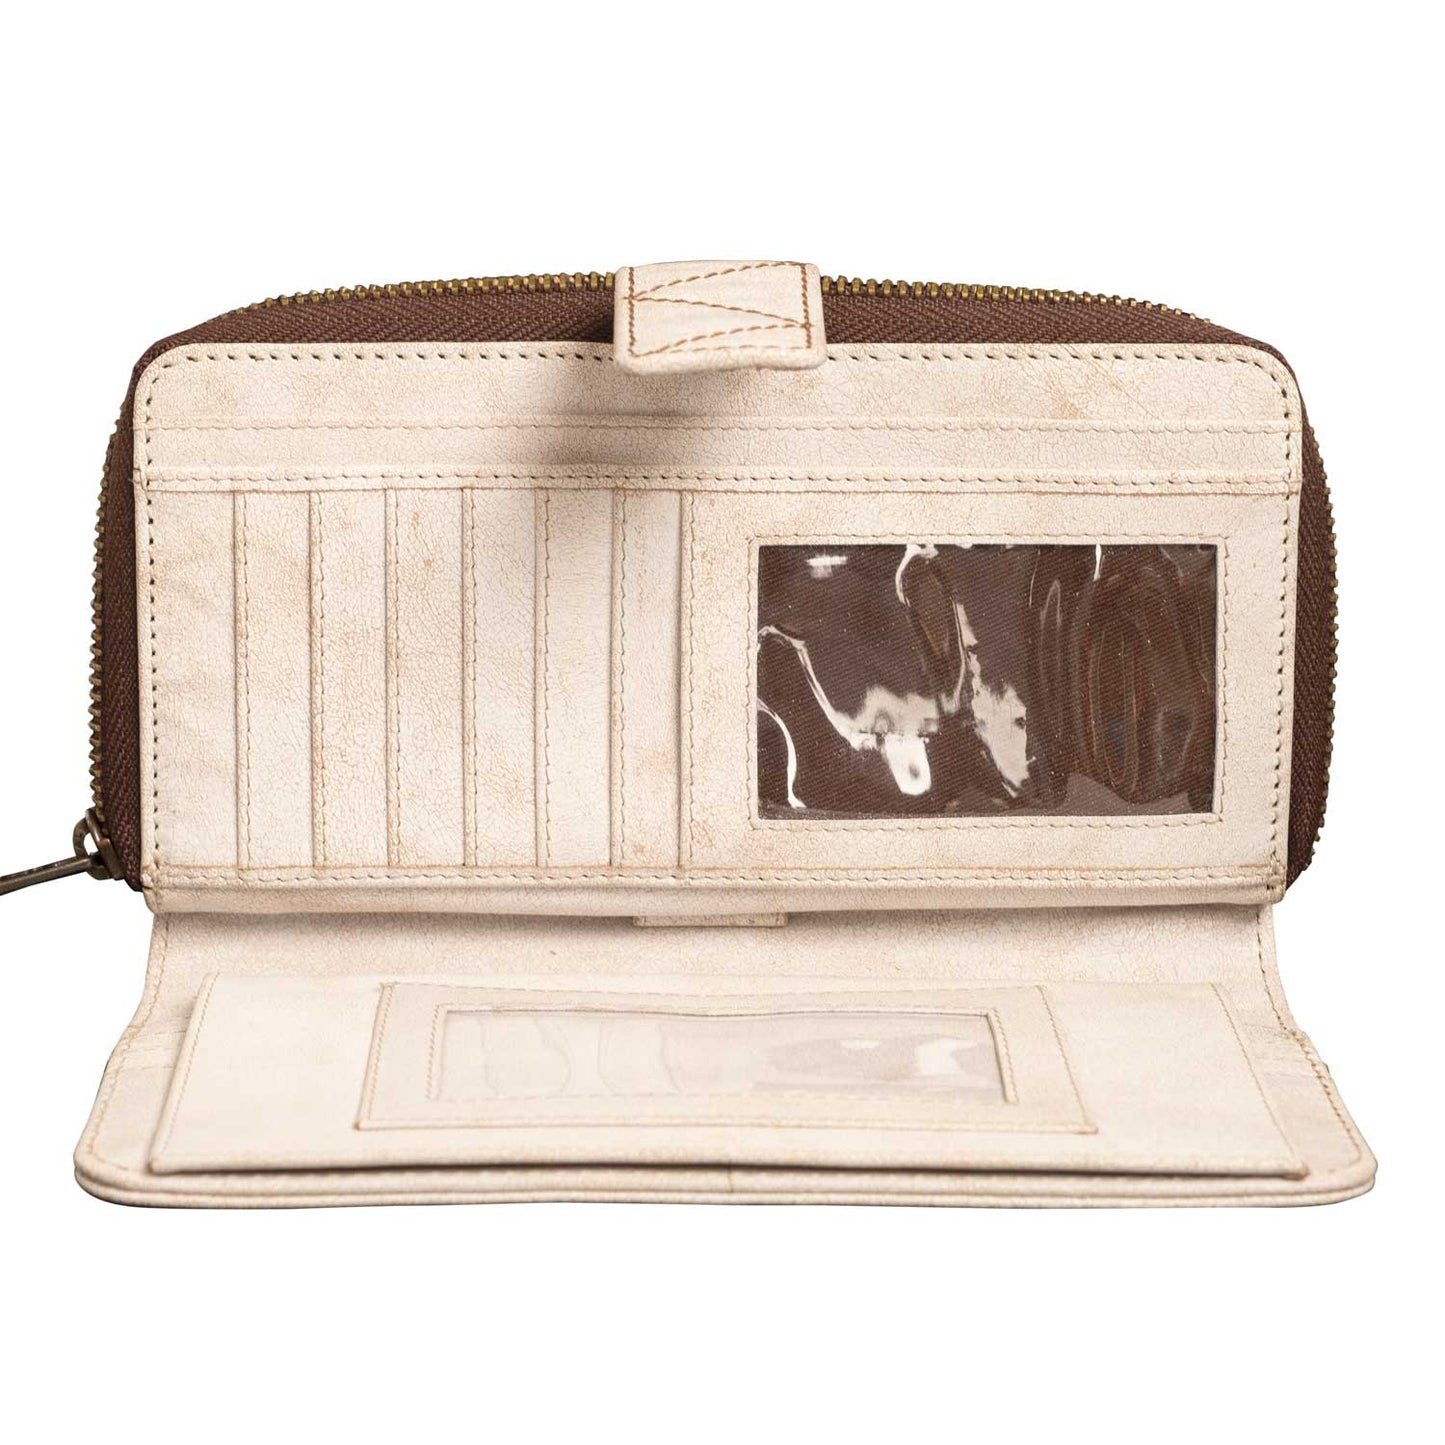 Cremello Chelsea Wallet by STS Ranchwear